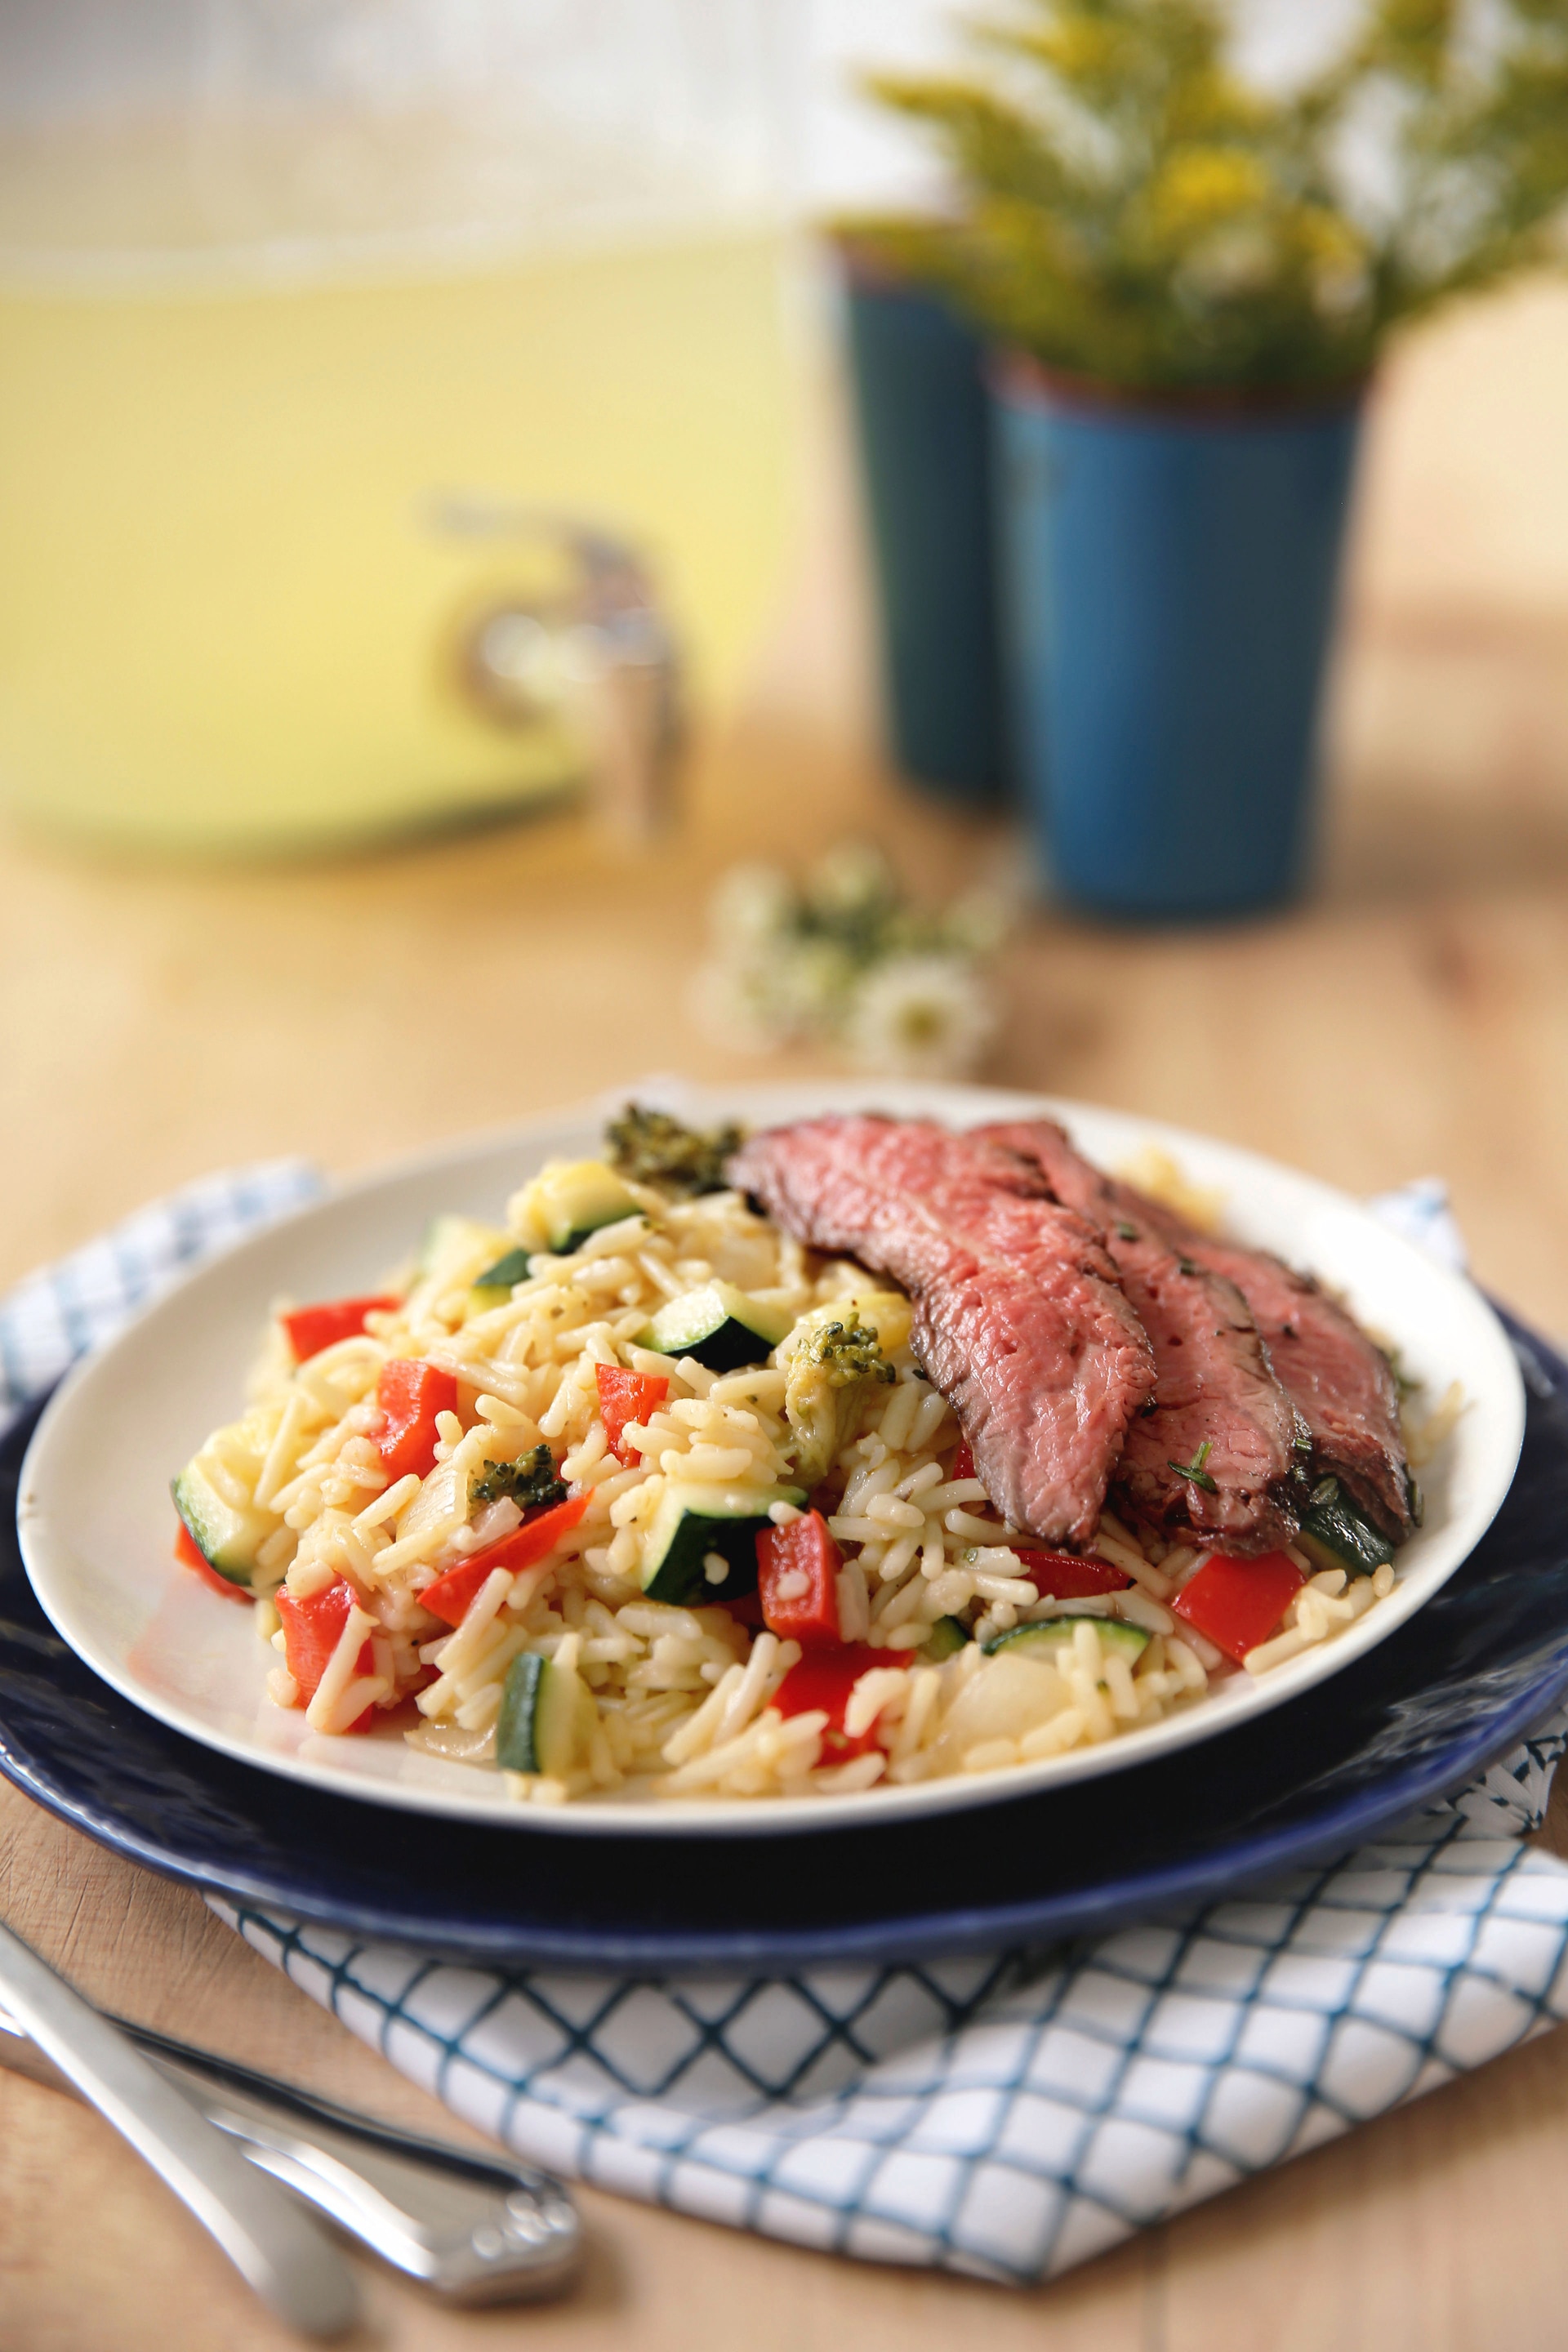 Grilled Steak and Summer Vegetable Rice